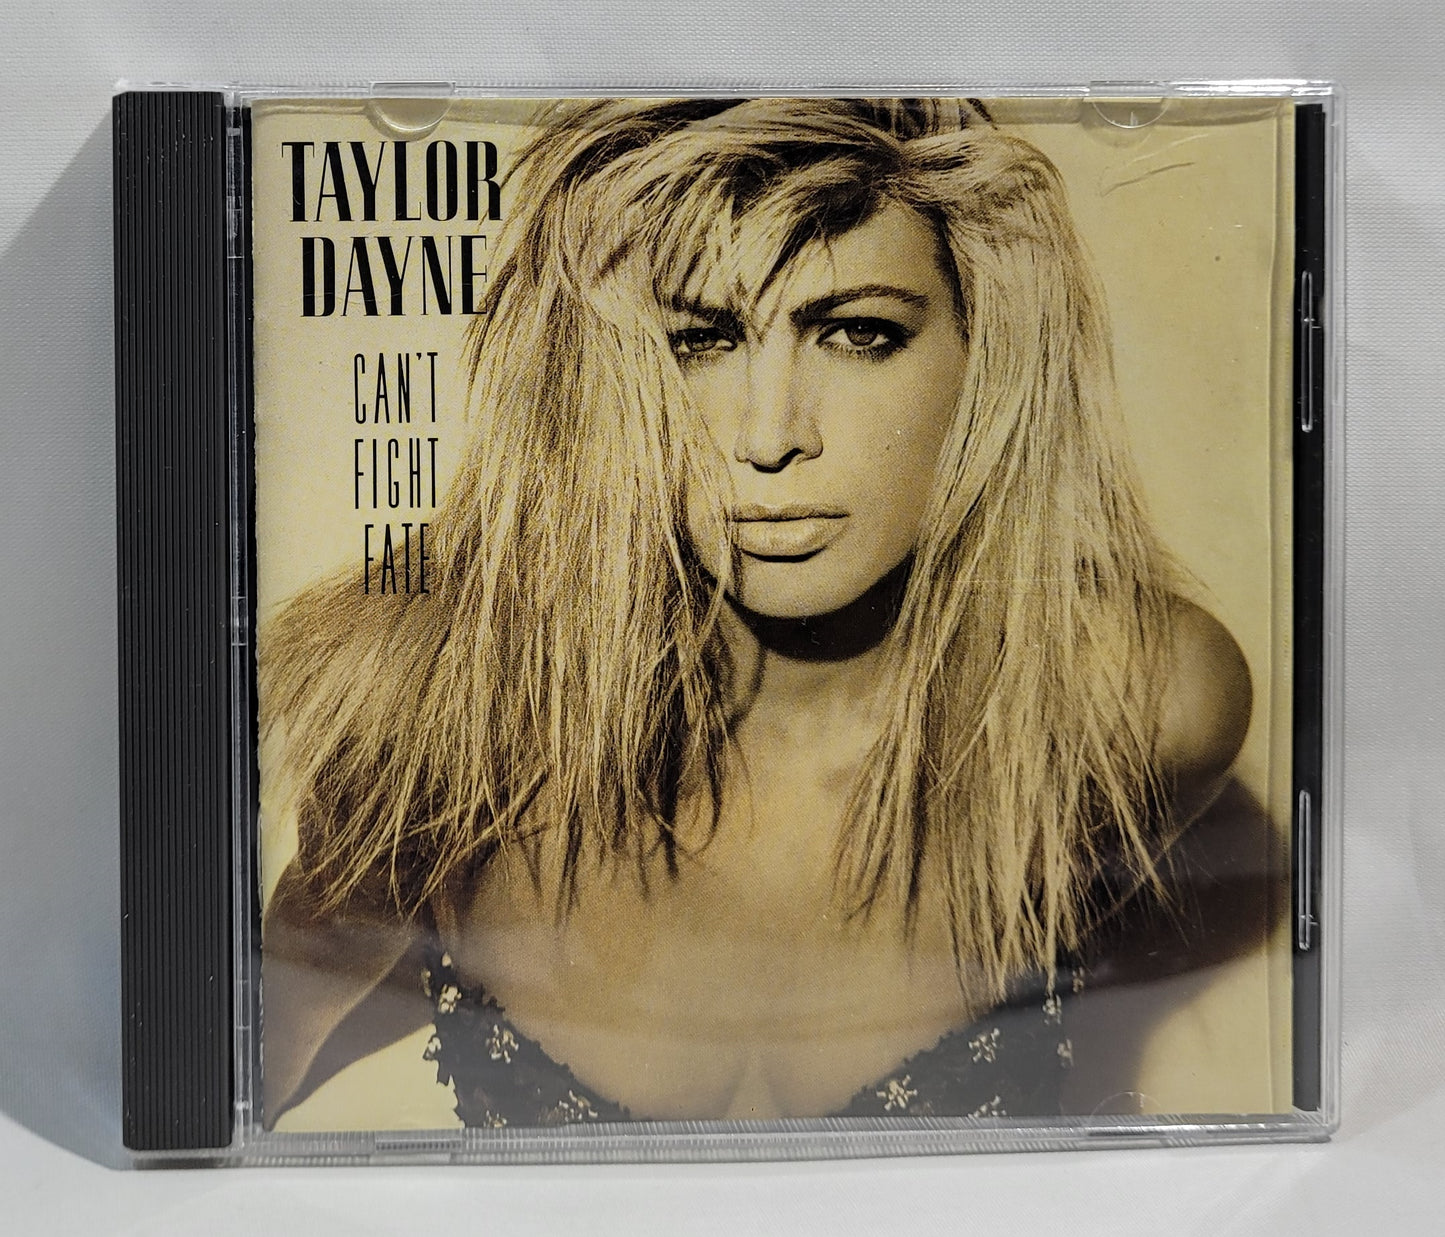 Taylor Dayne - Can't Fight Fate [CD]